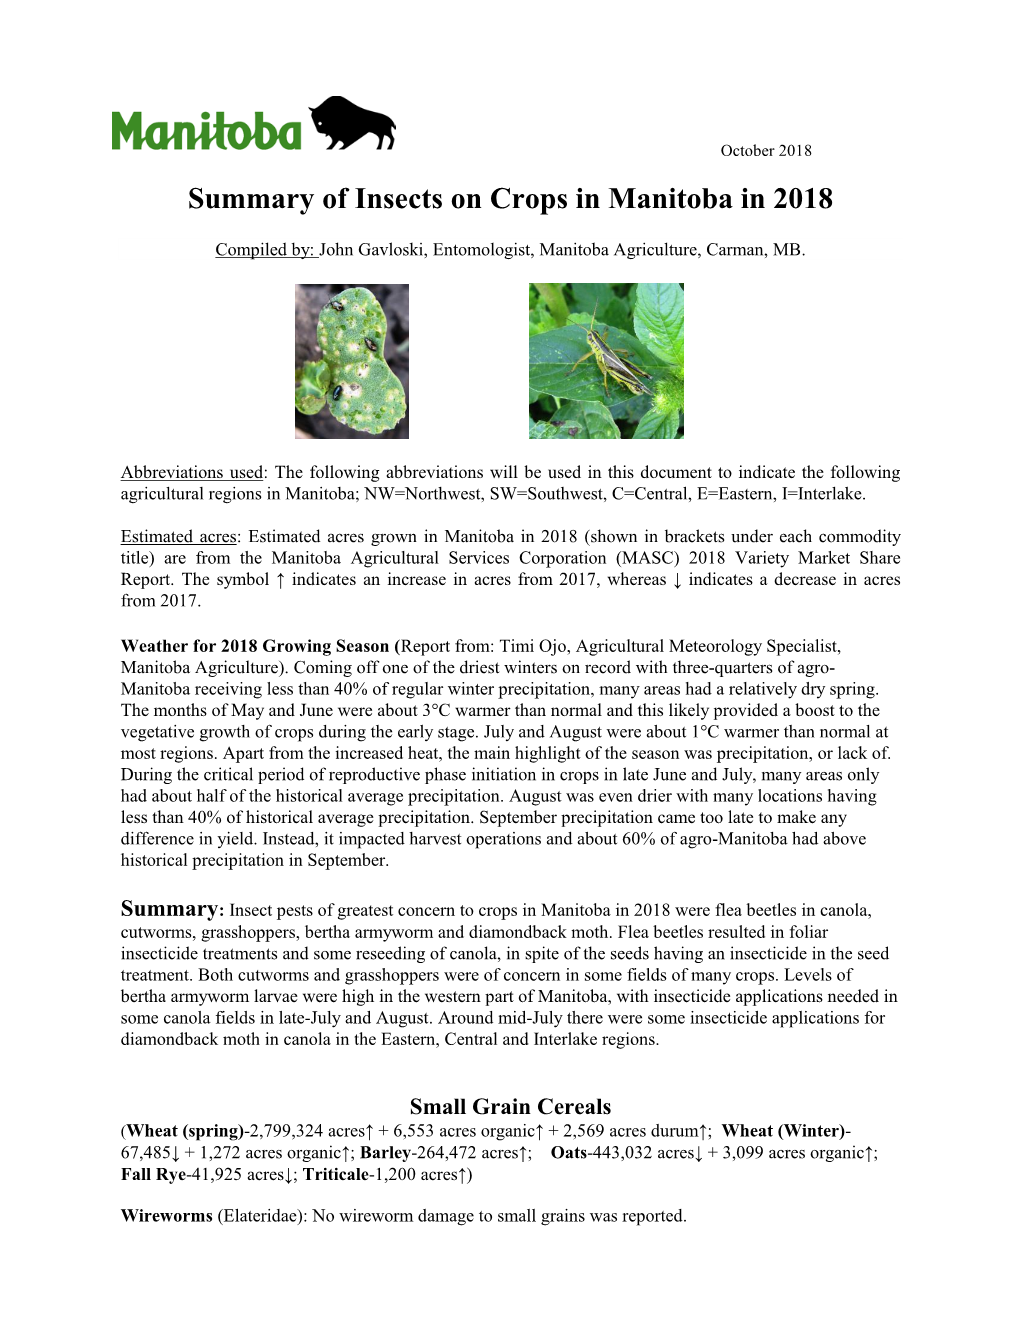 Summary of Insects on Crops in Manitoba in 2018